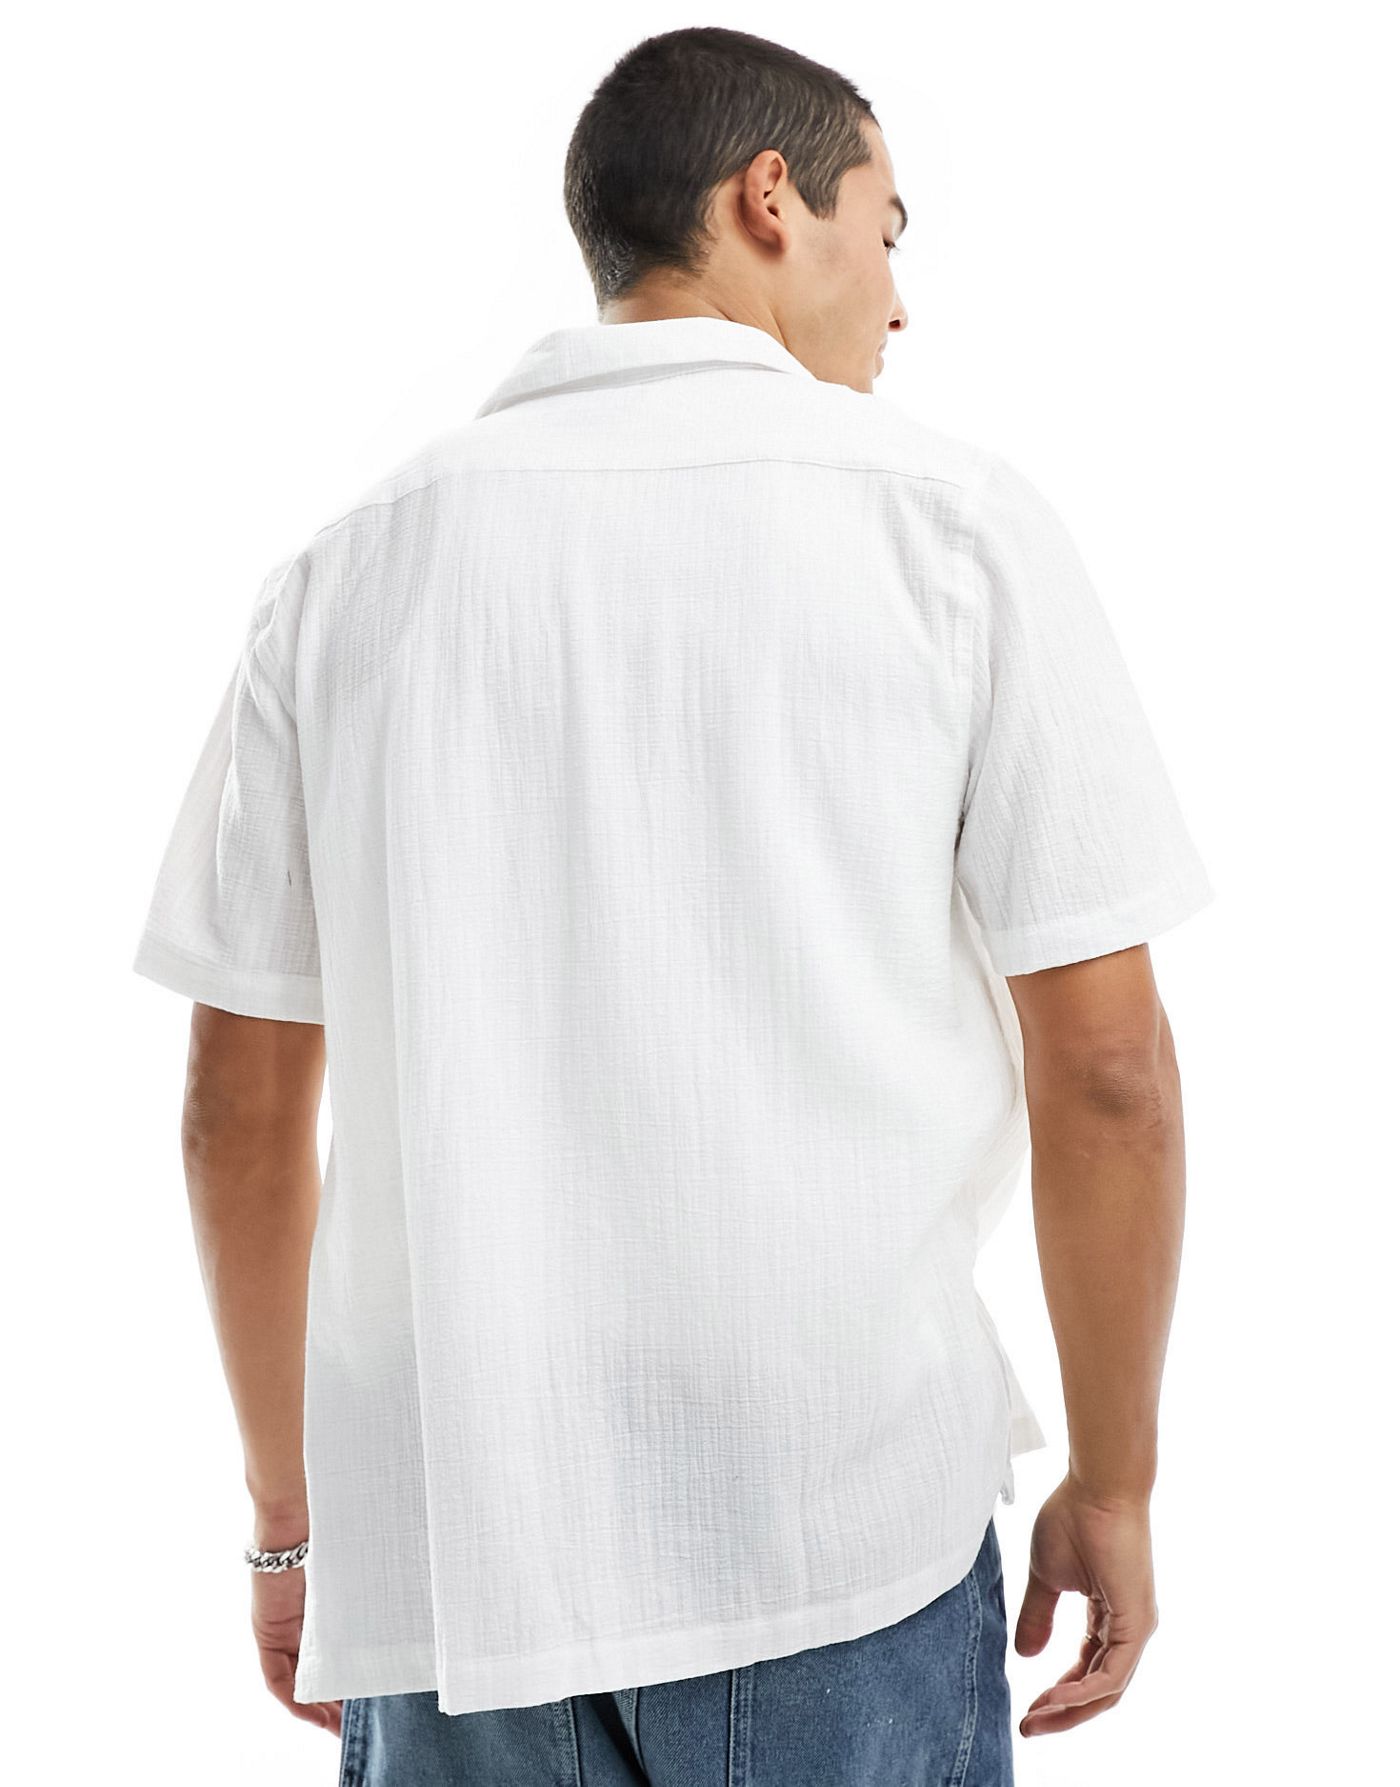 Cotton:On Riviera short sleeve shirt in white